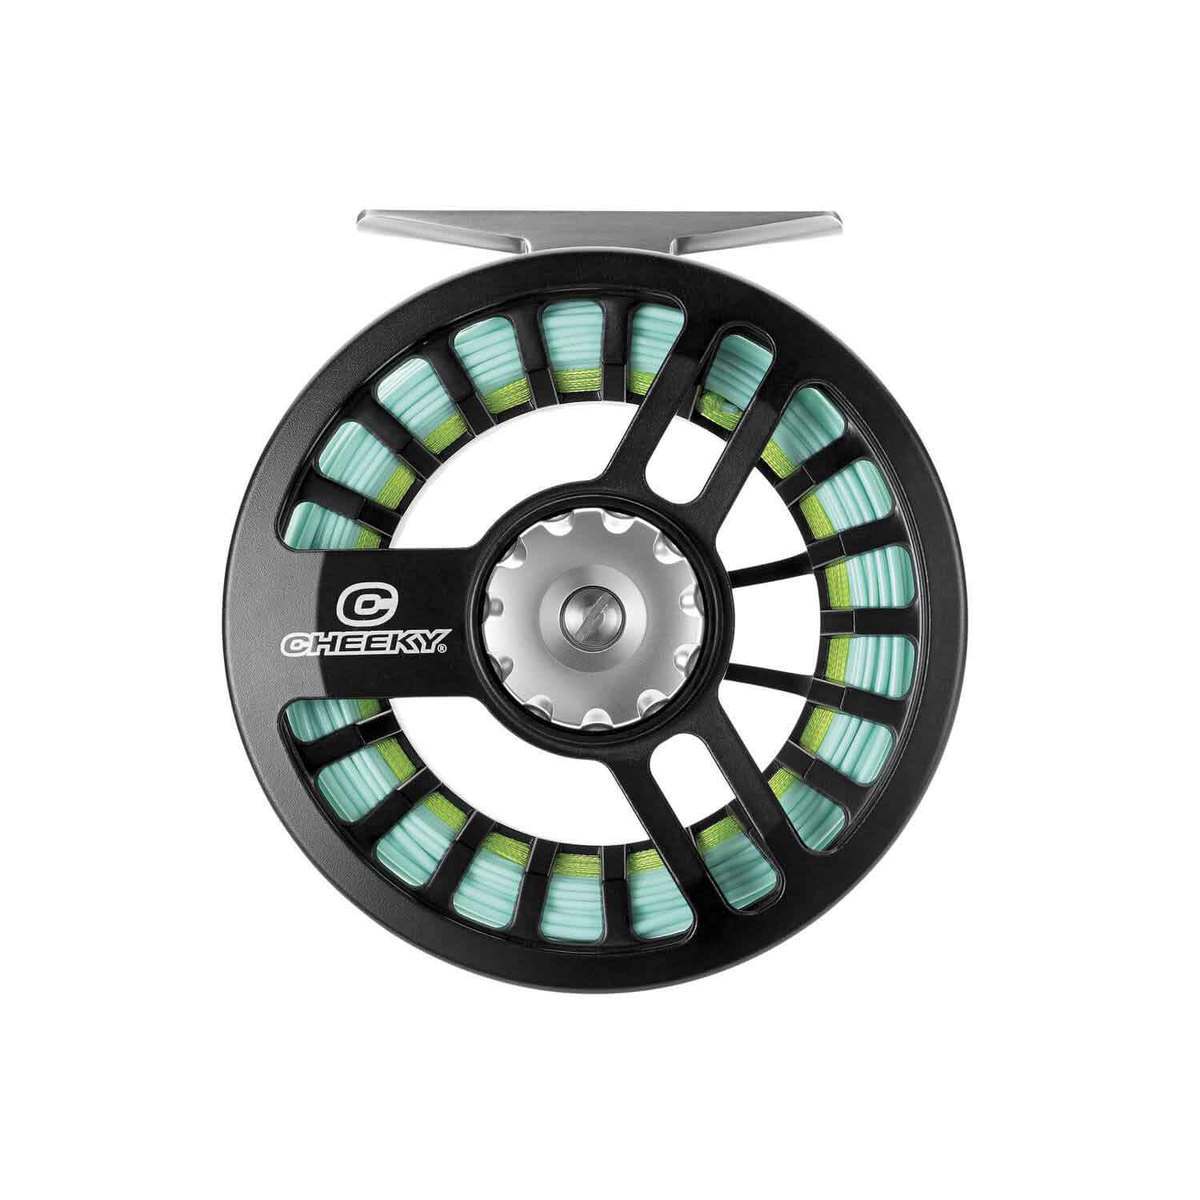 Pflüger 7-8 Line Weight Fishing Reels Fly Reel for sale